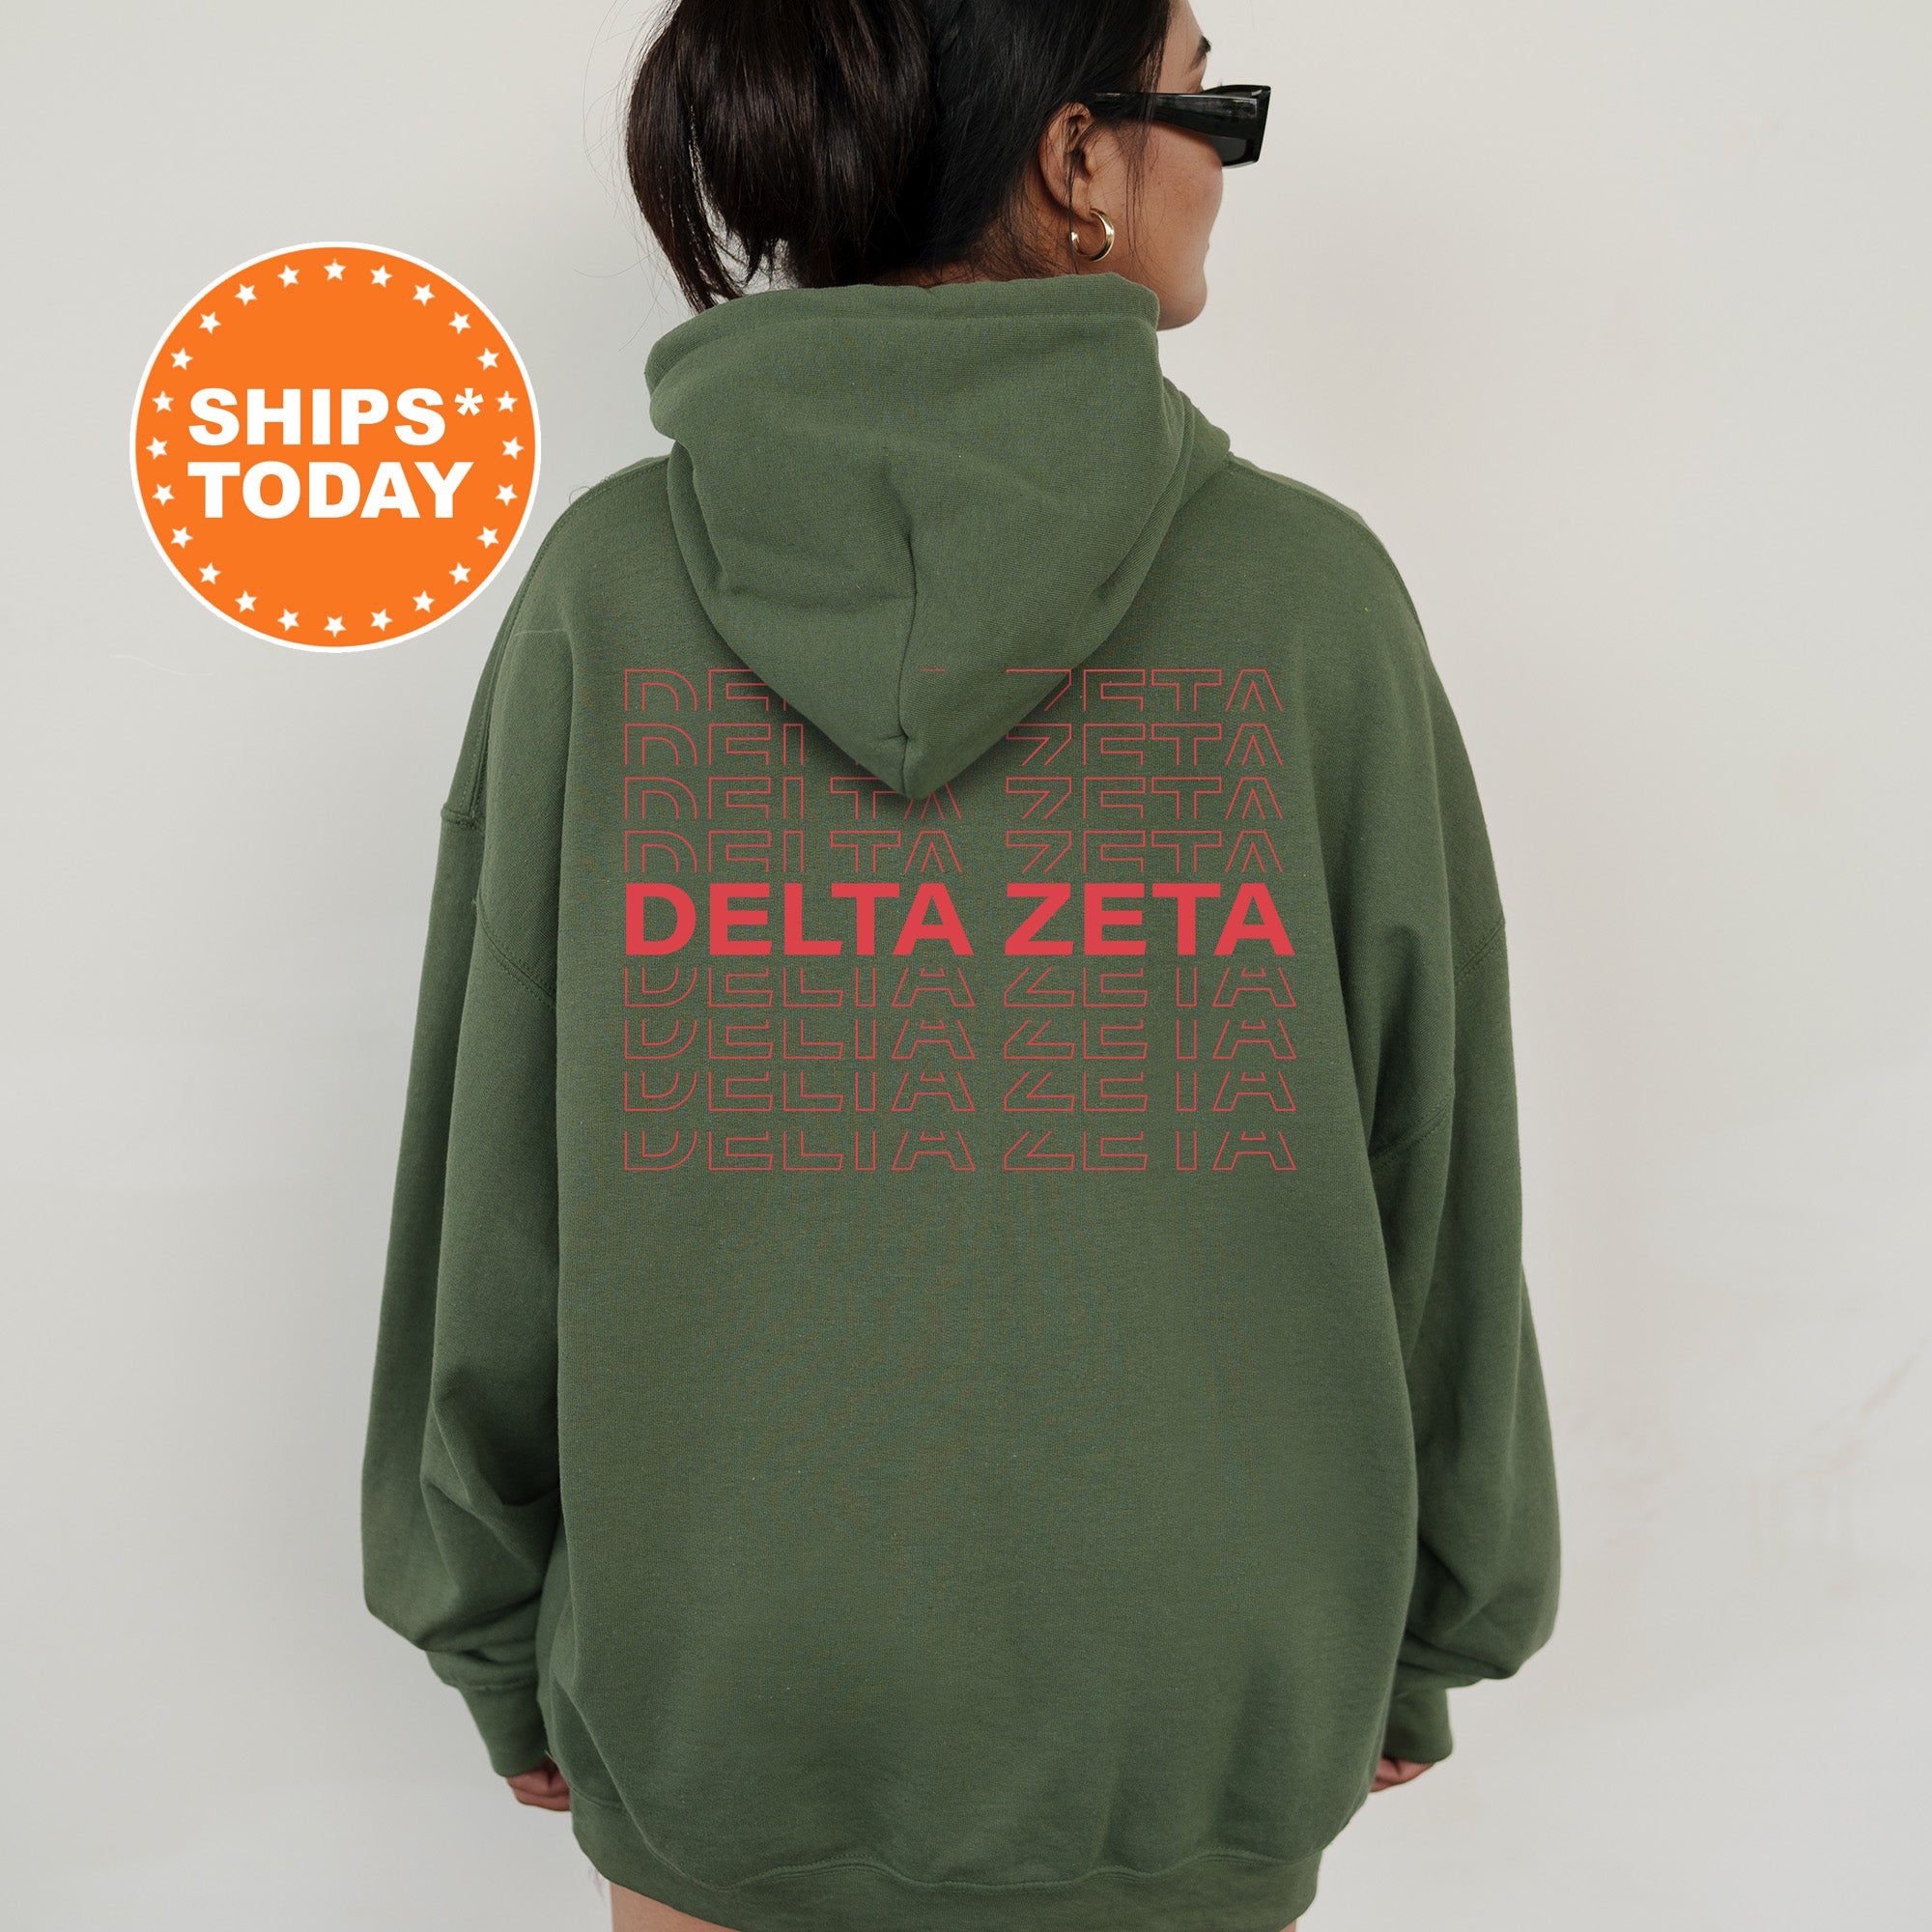 a woman wearing a green sweatshirt with the words delta zeta printed on it